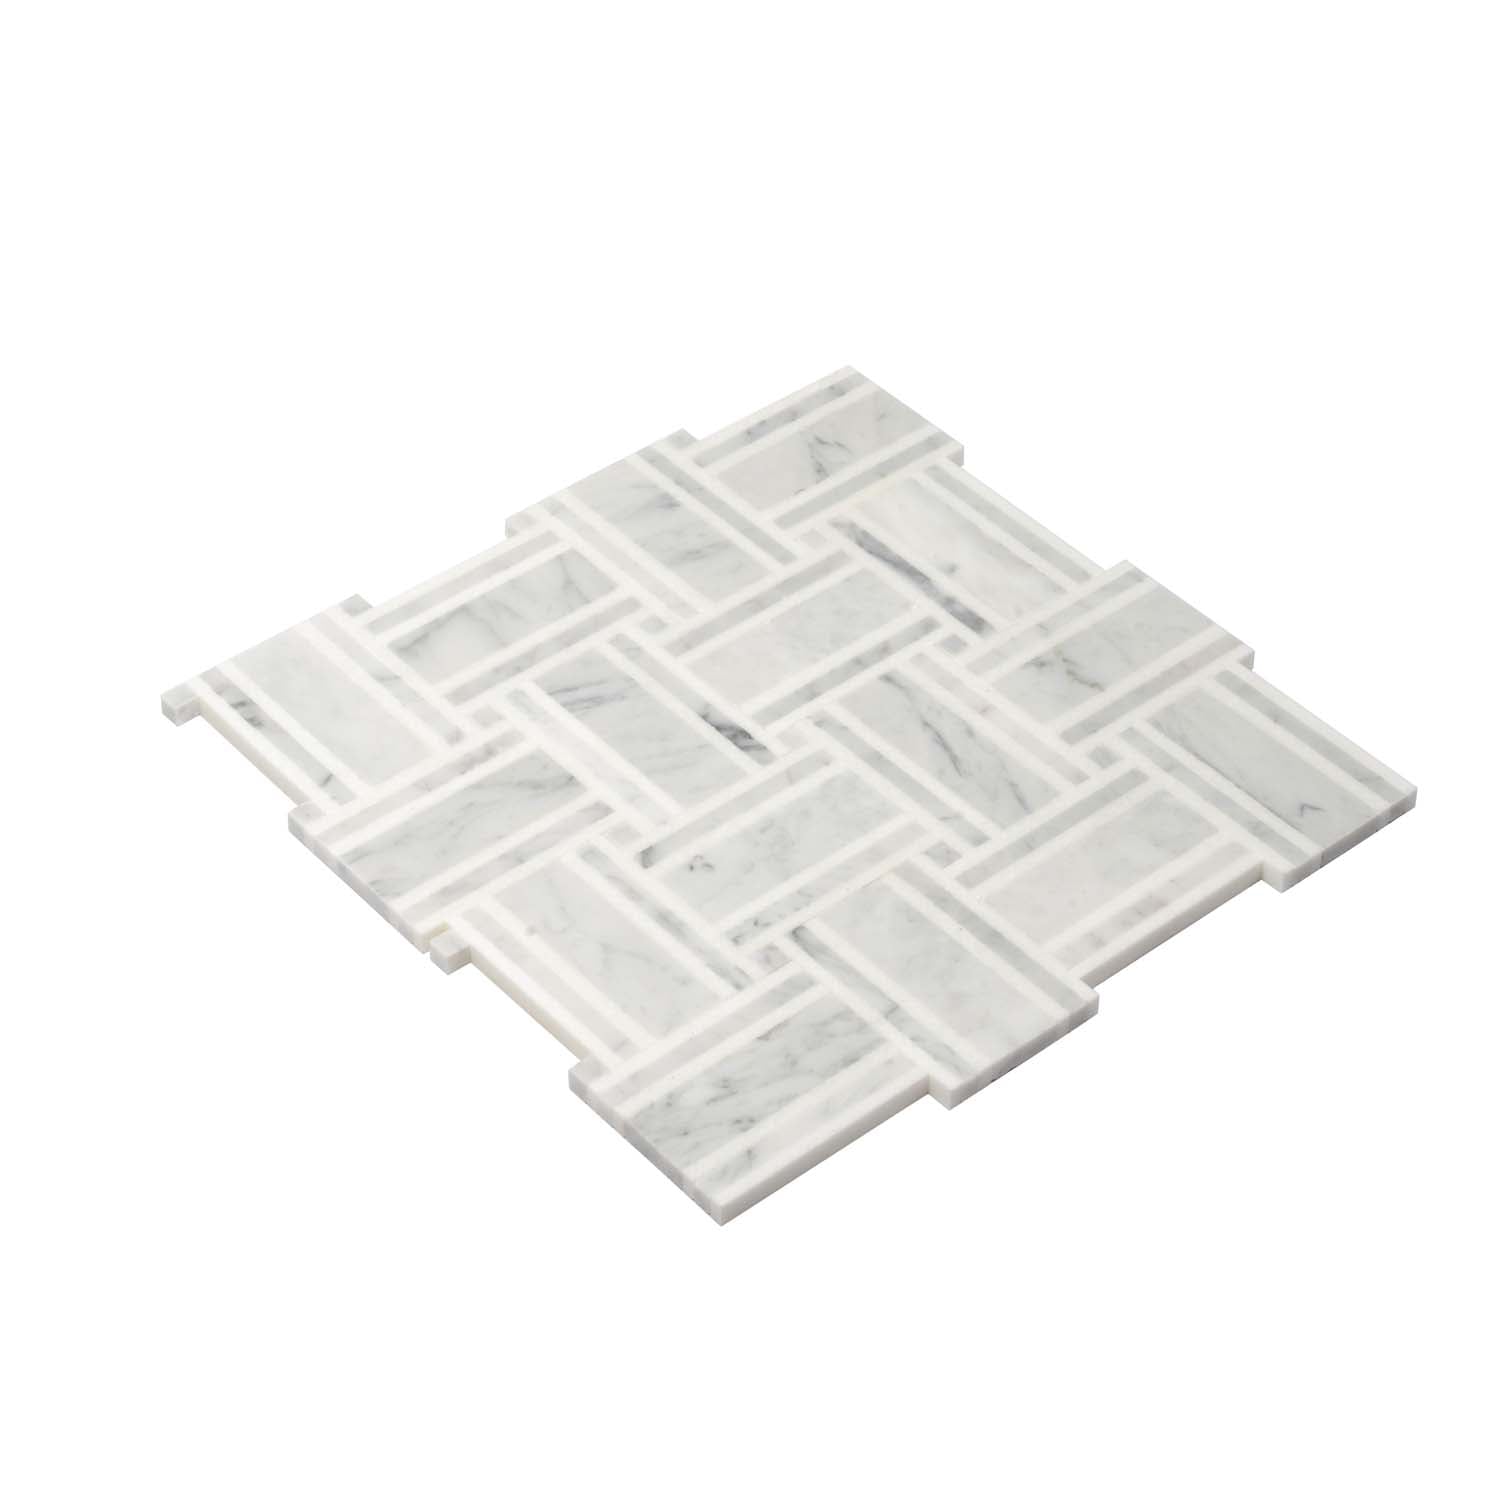 White and Gray Mosaic Tiles